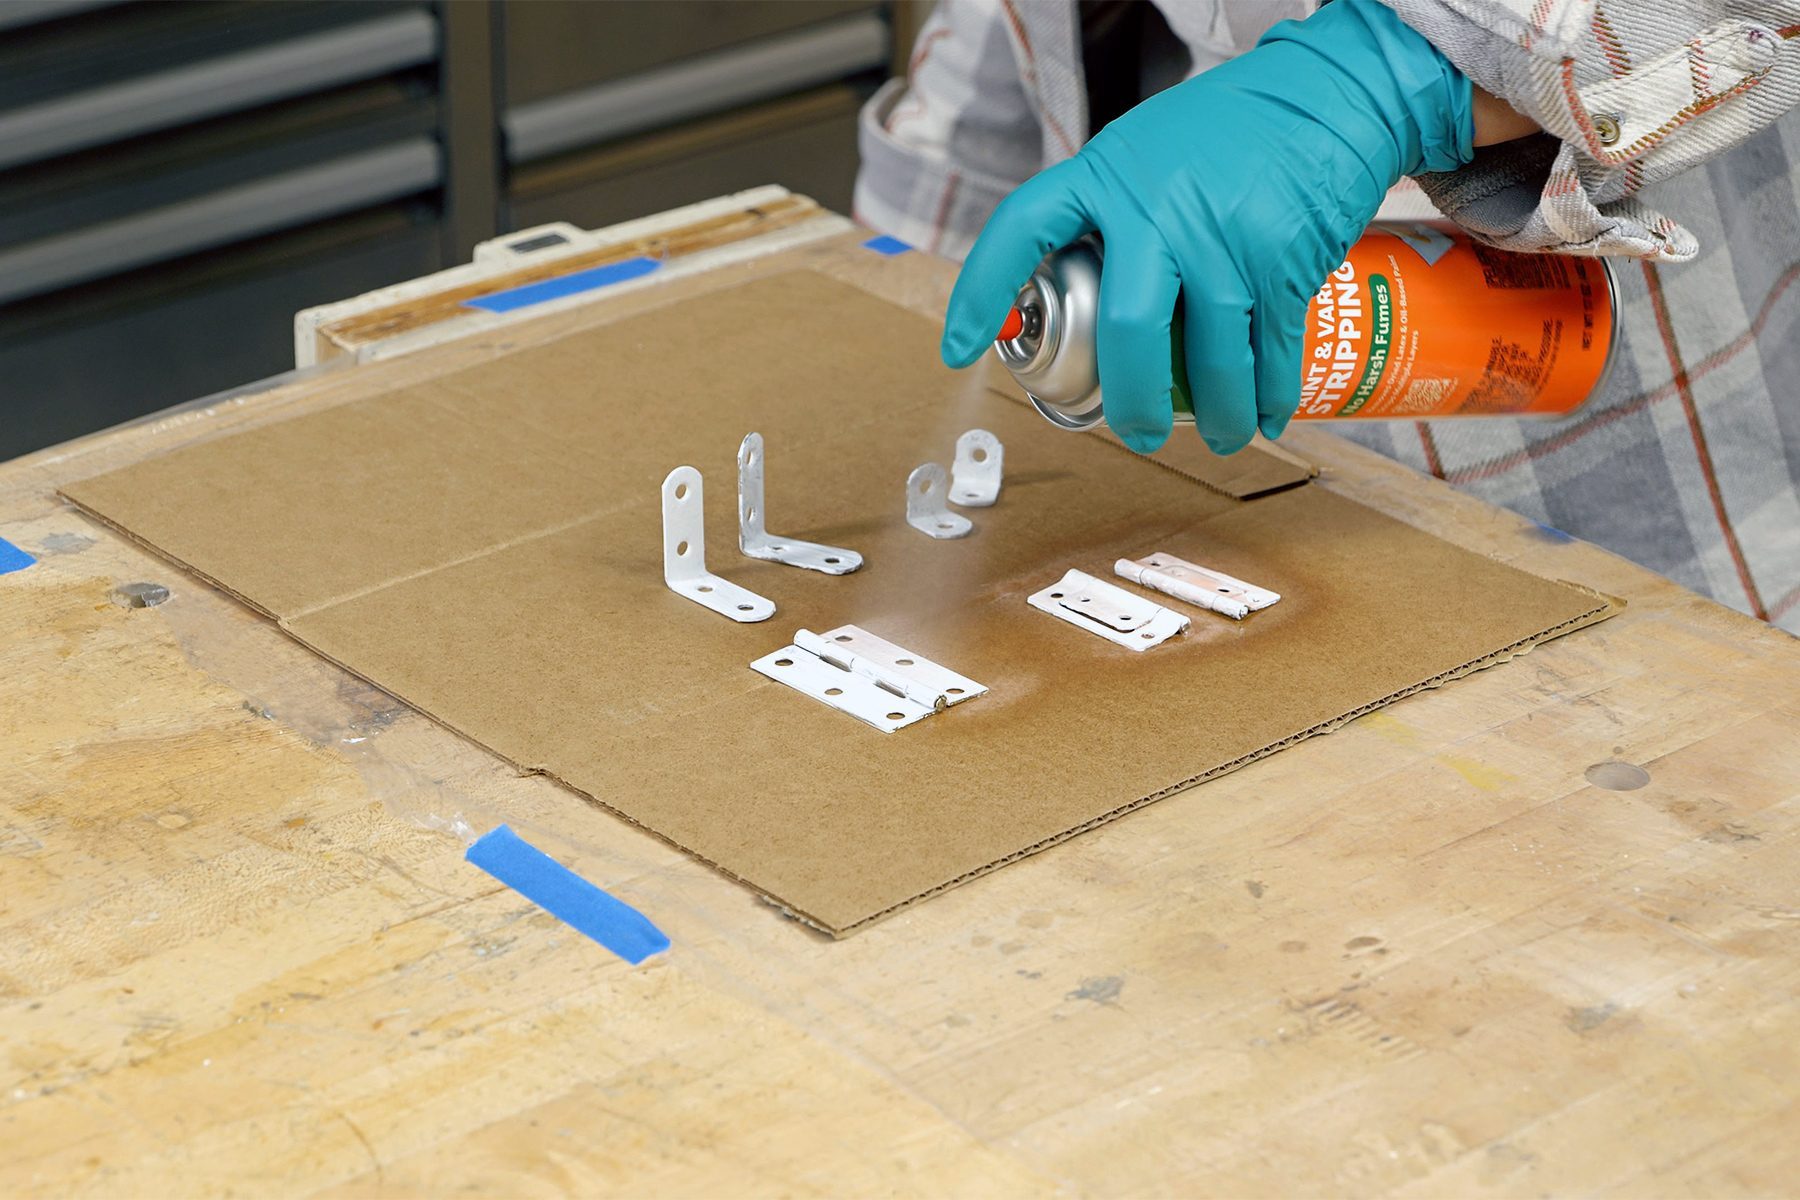 A person wearing teal gloves sprays paint from an orange can onto several metal brackets and small metal plates positioned on a piece of cardboard on a workbench. Tools and blue tape are visible on the wooden surface surrounding the cardboard.